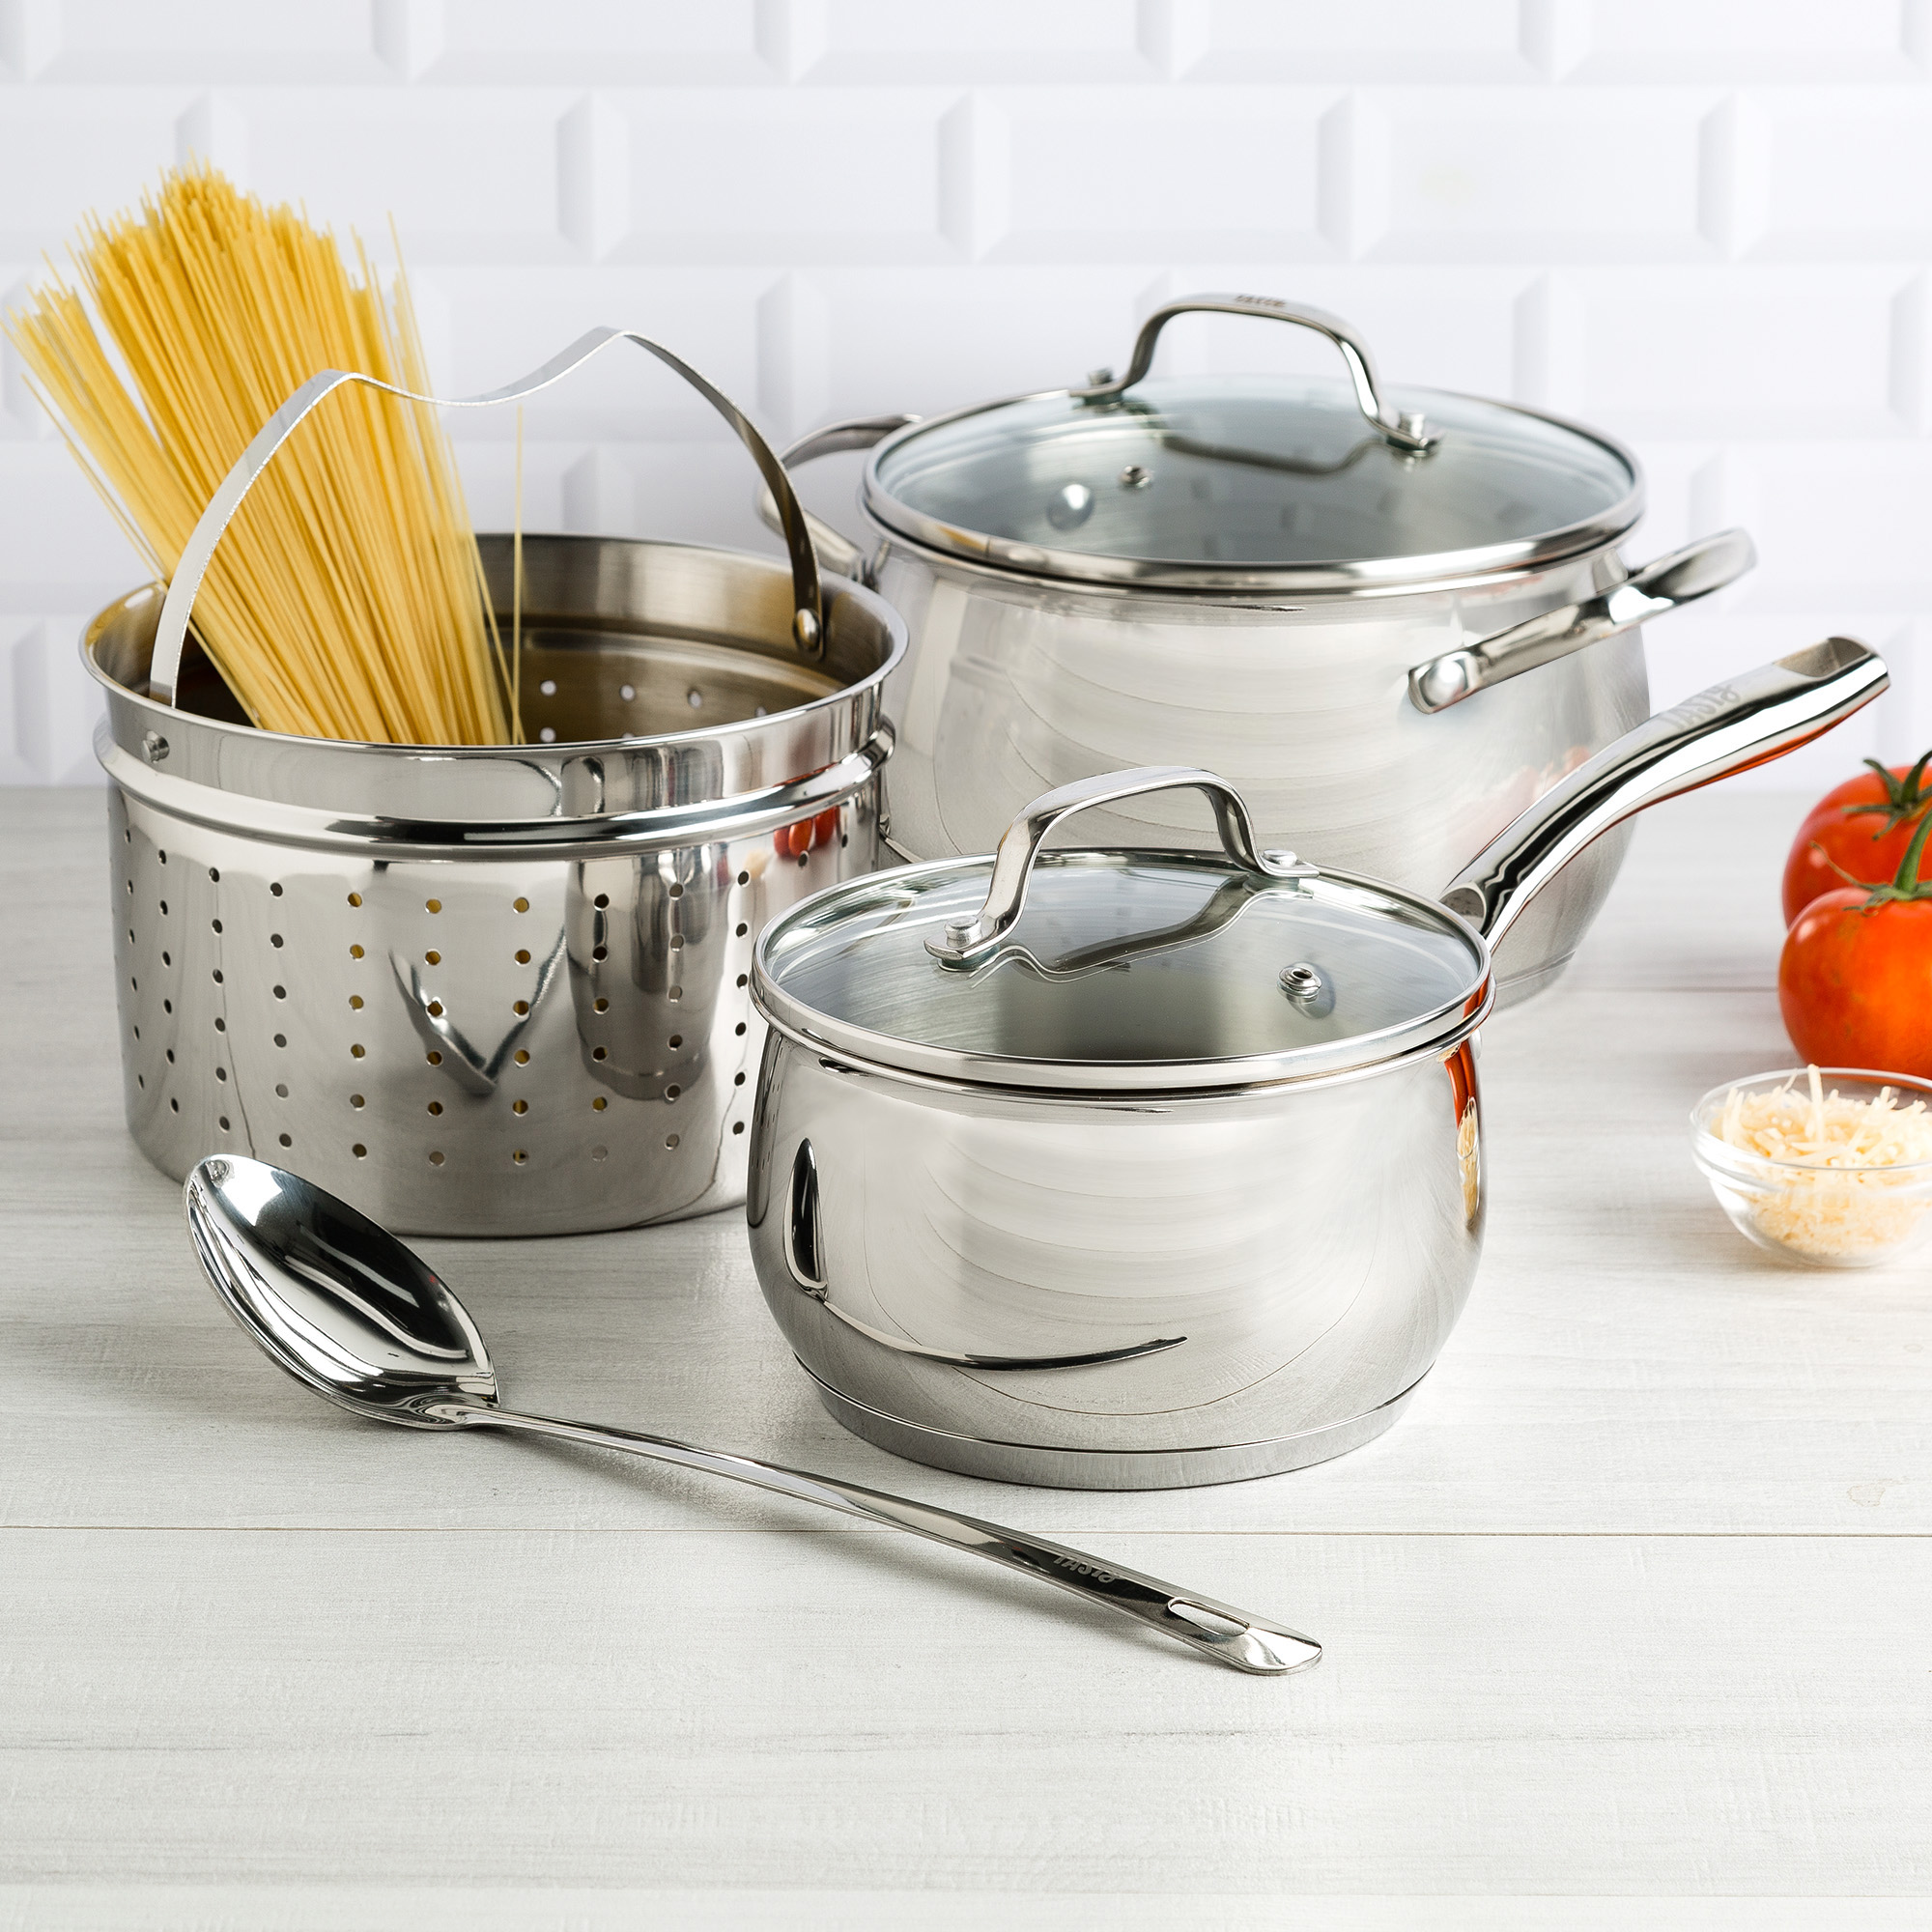 Tasty 6 Piece Premium Stainless Steel Cookware Set - image 1 of 9